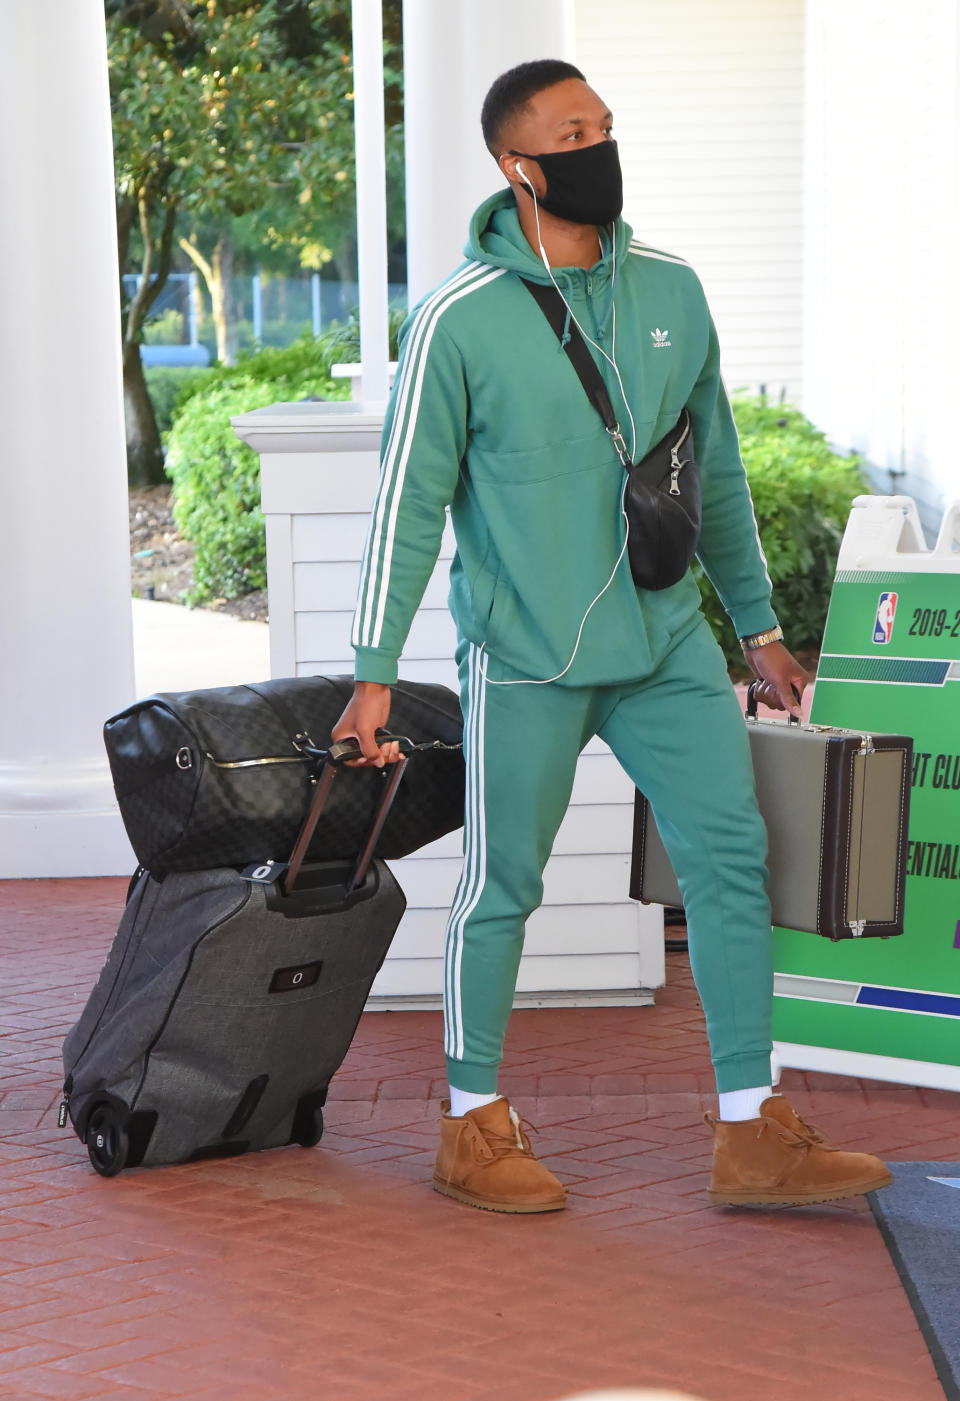 Damian Lillard #0 of the Portland Trail Blazers arrives at the hotel as part of the NBA Restart 2020 on July 9, 2020 in Orlando, Florida. (Photo by Bill Baptist/NBAE via Getty Images)